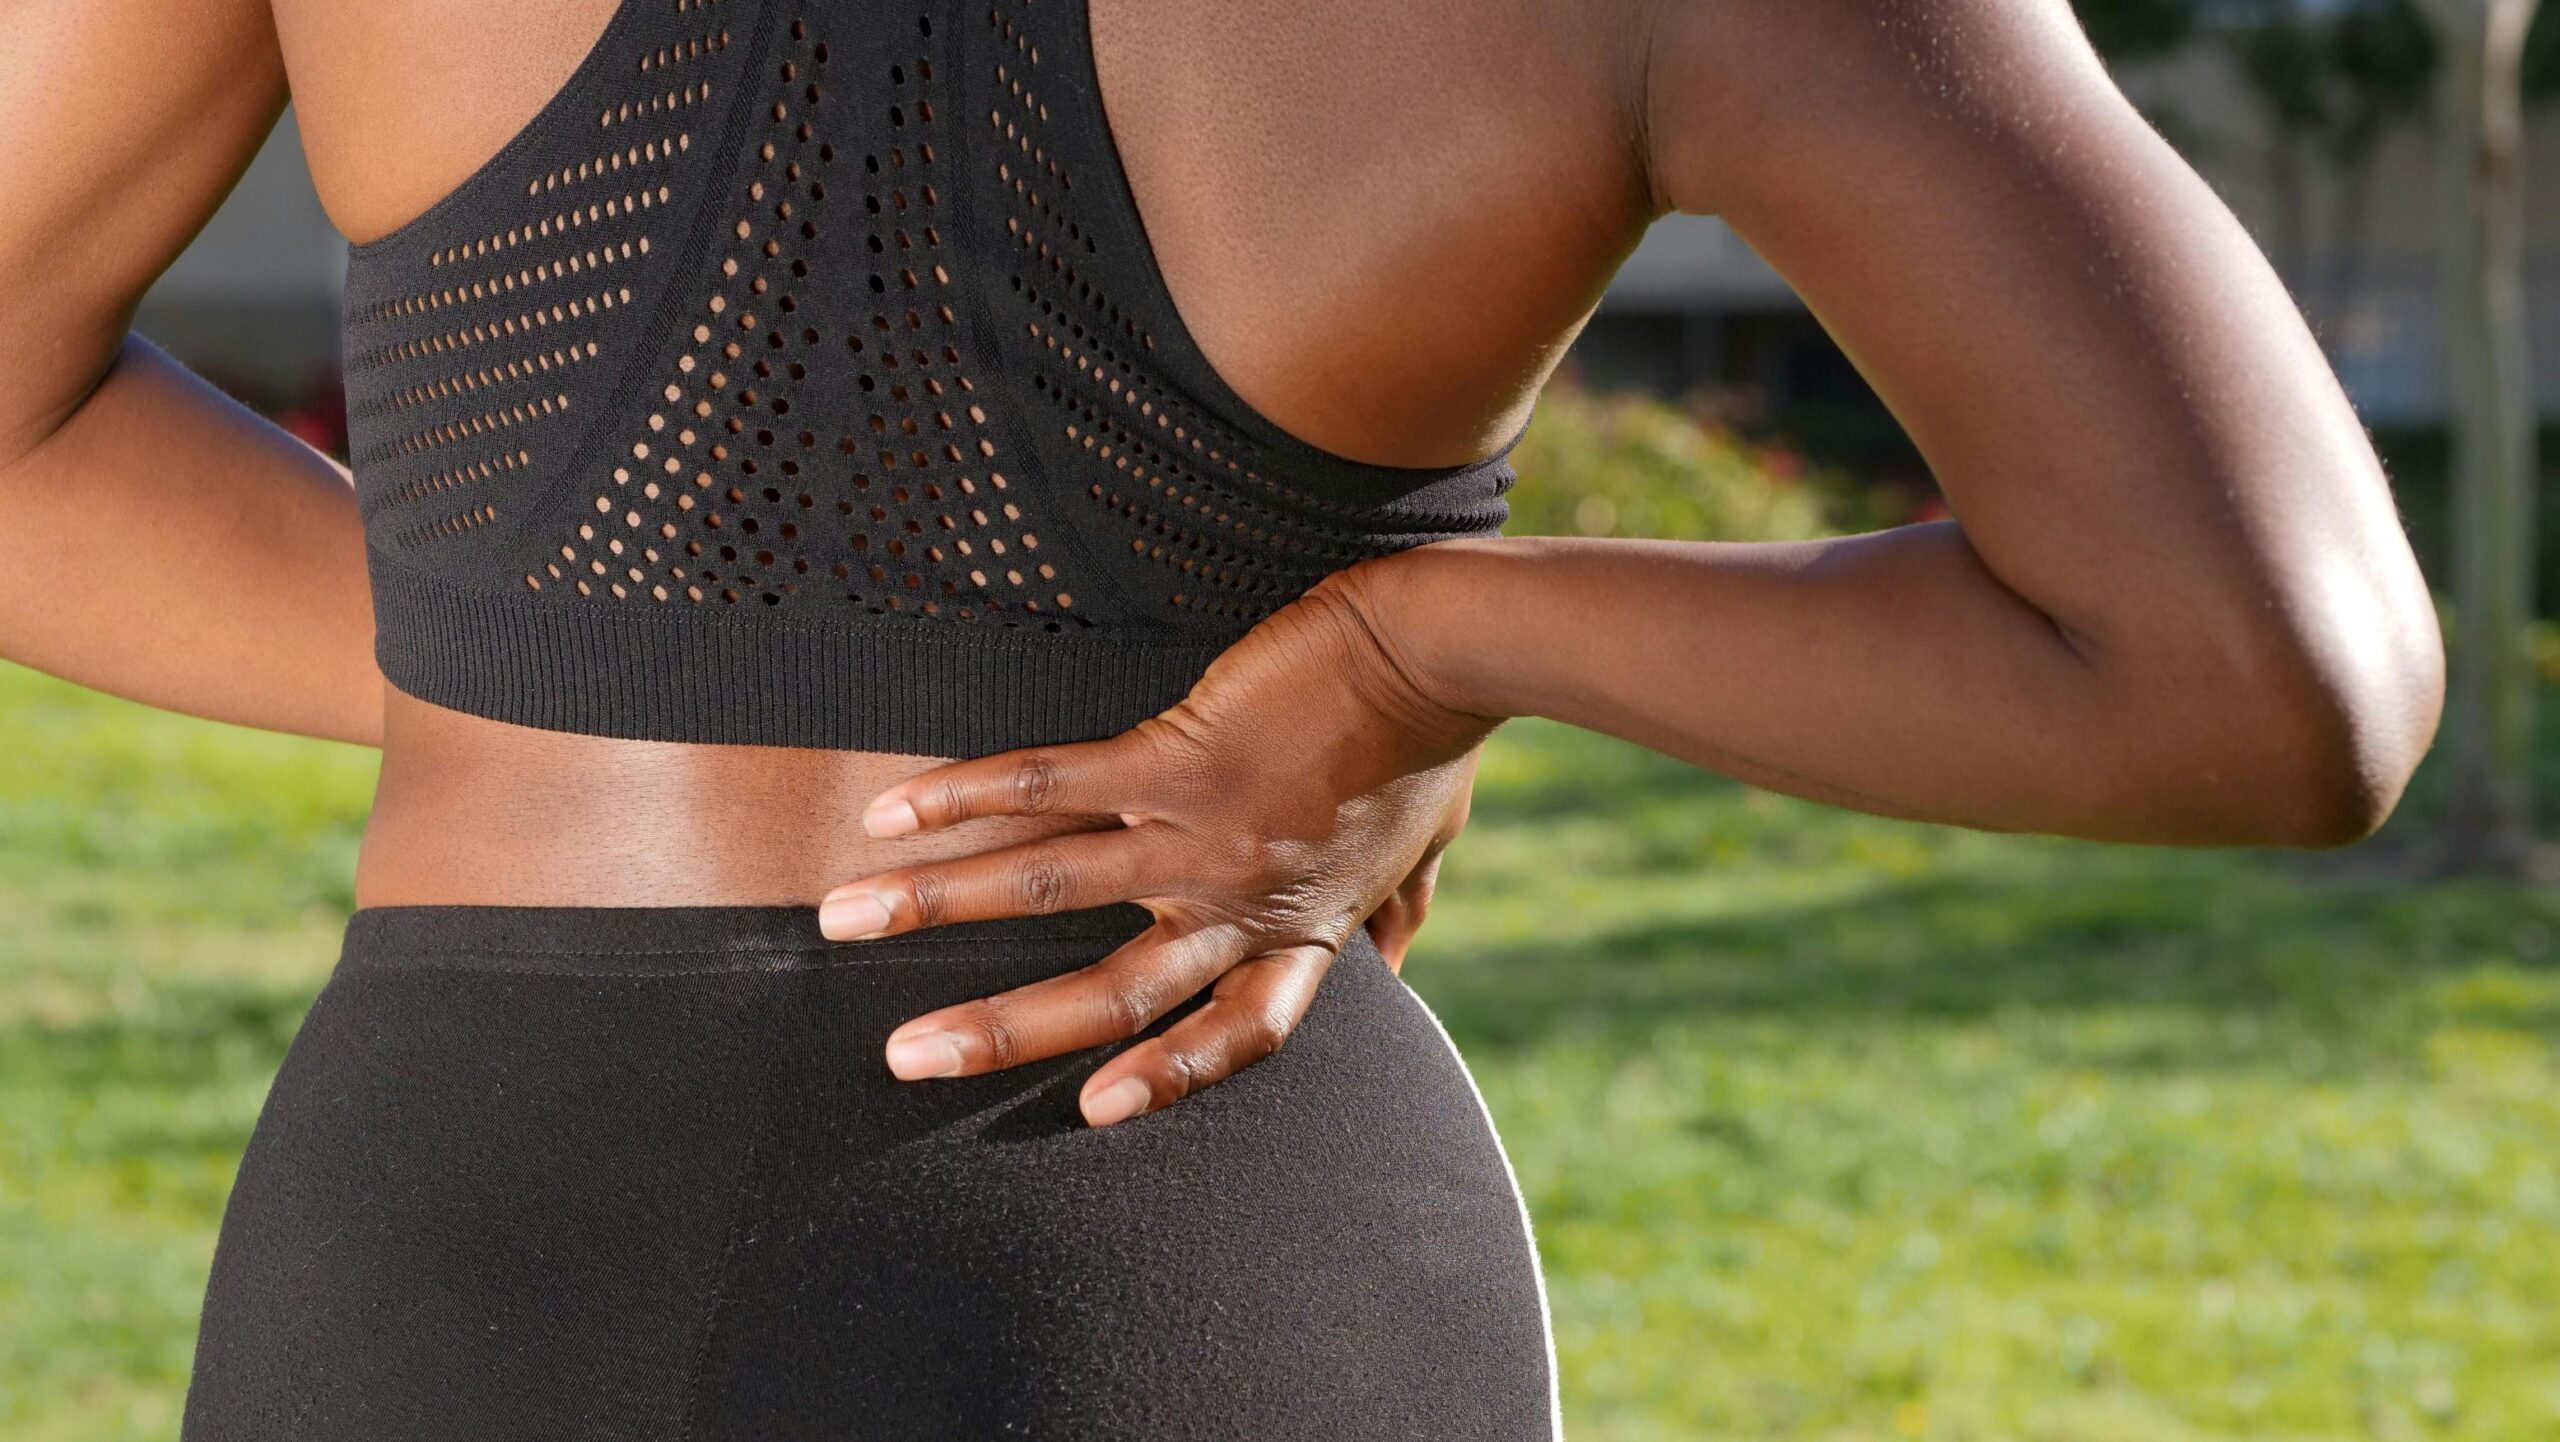 Up-close photo of a person wearing exercise clothes and holding their low back to suggest sciatica pain.